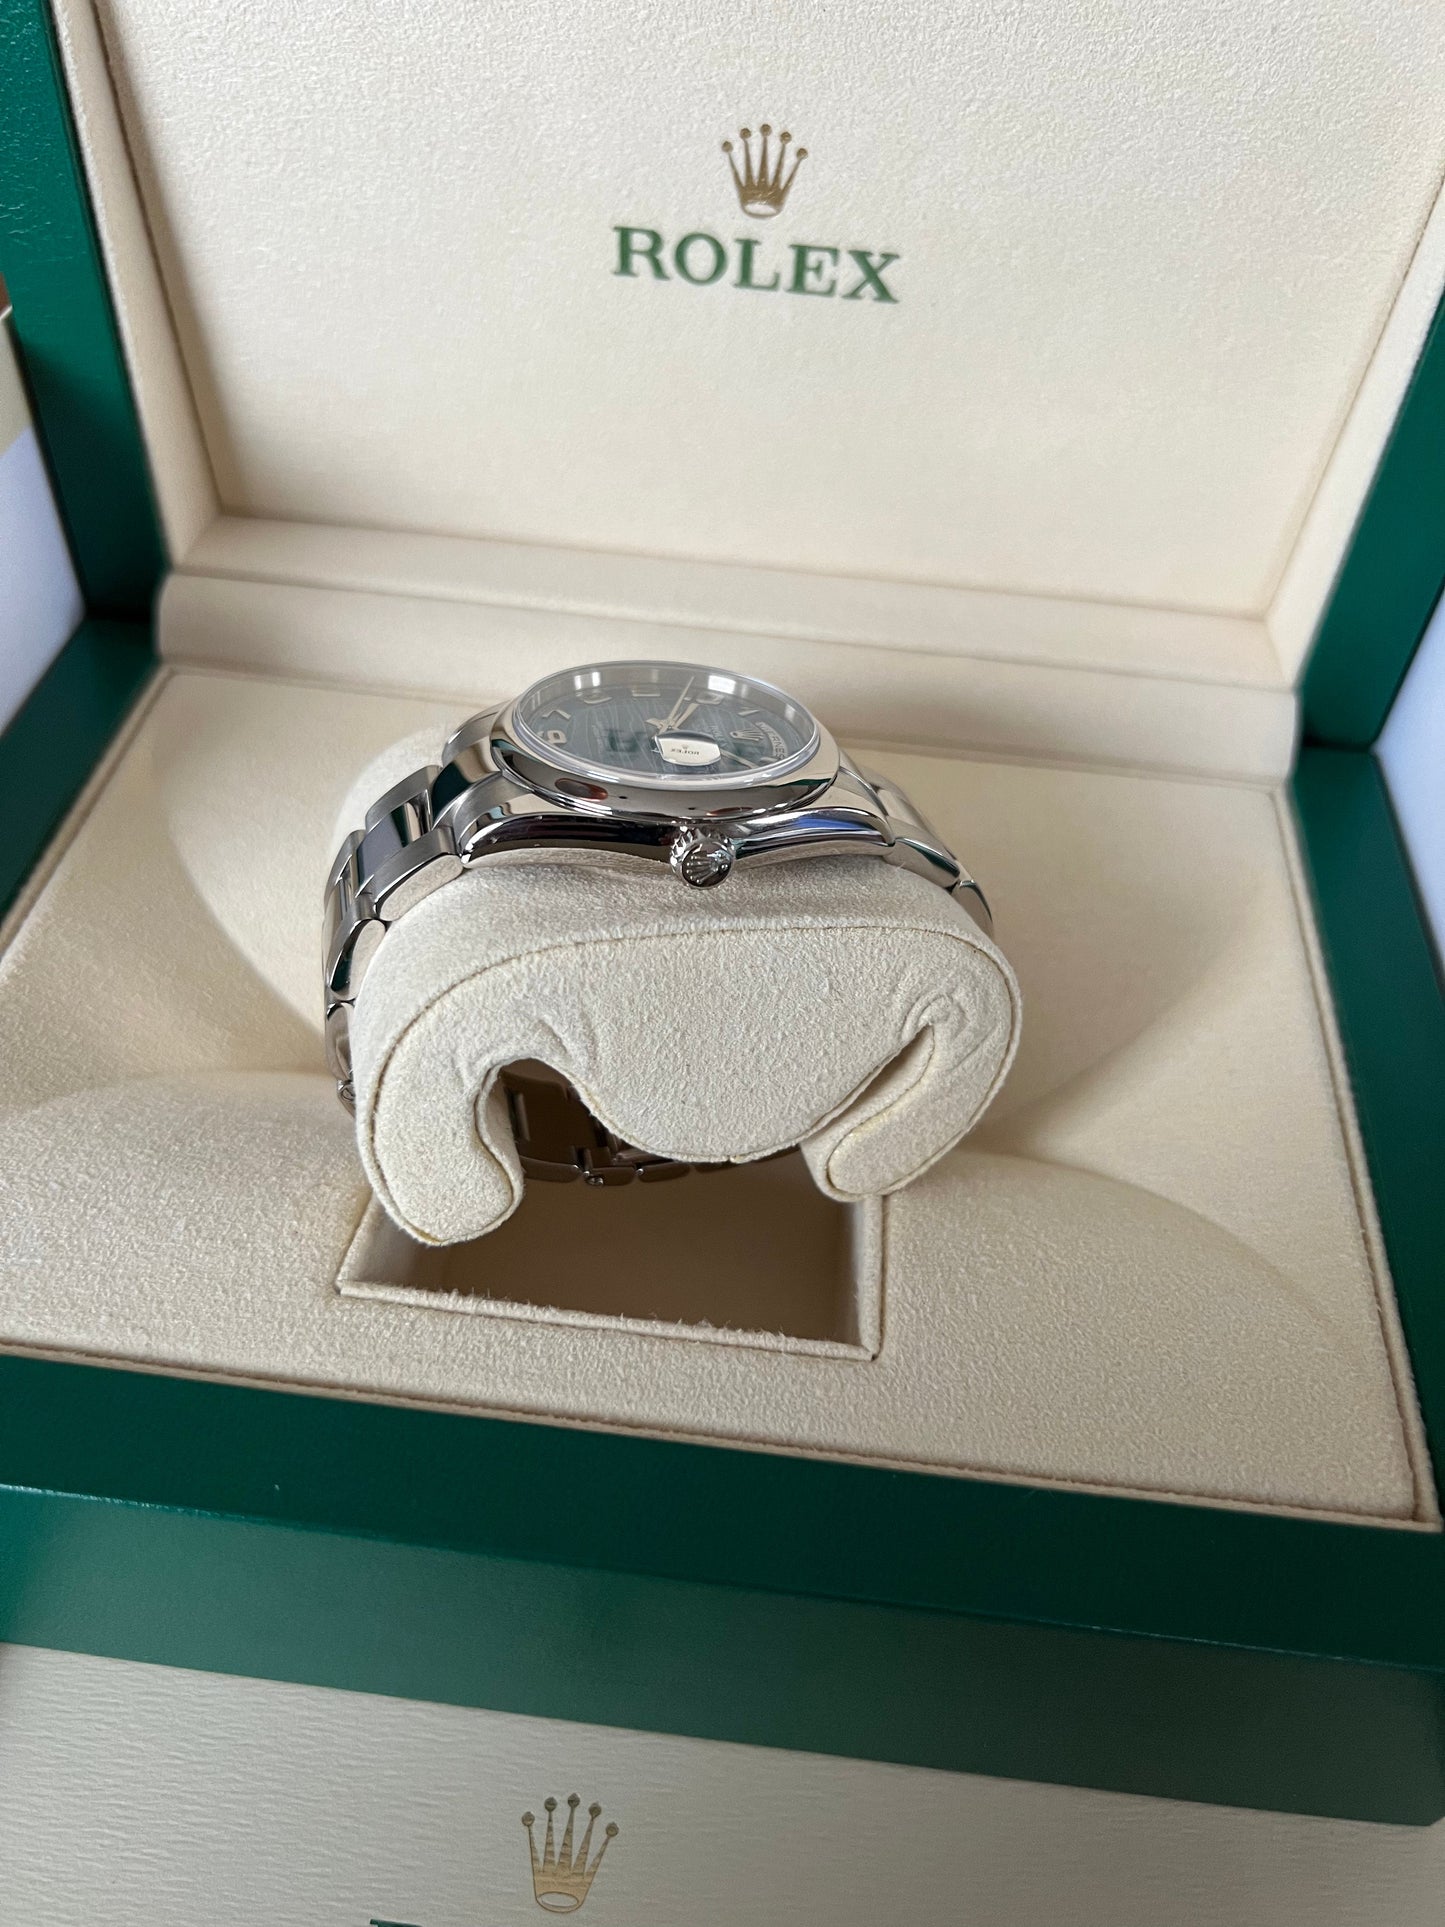 ROLEX Day-Date 18K White Gold, Blue Wave Dial Rare